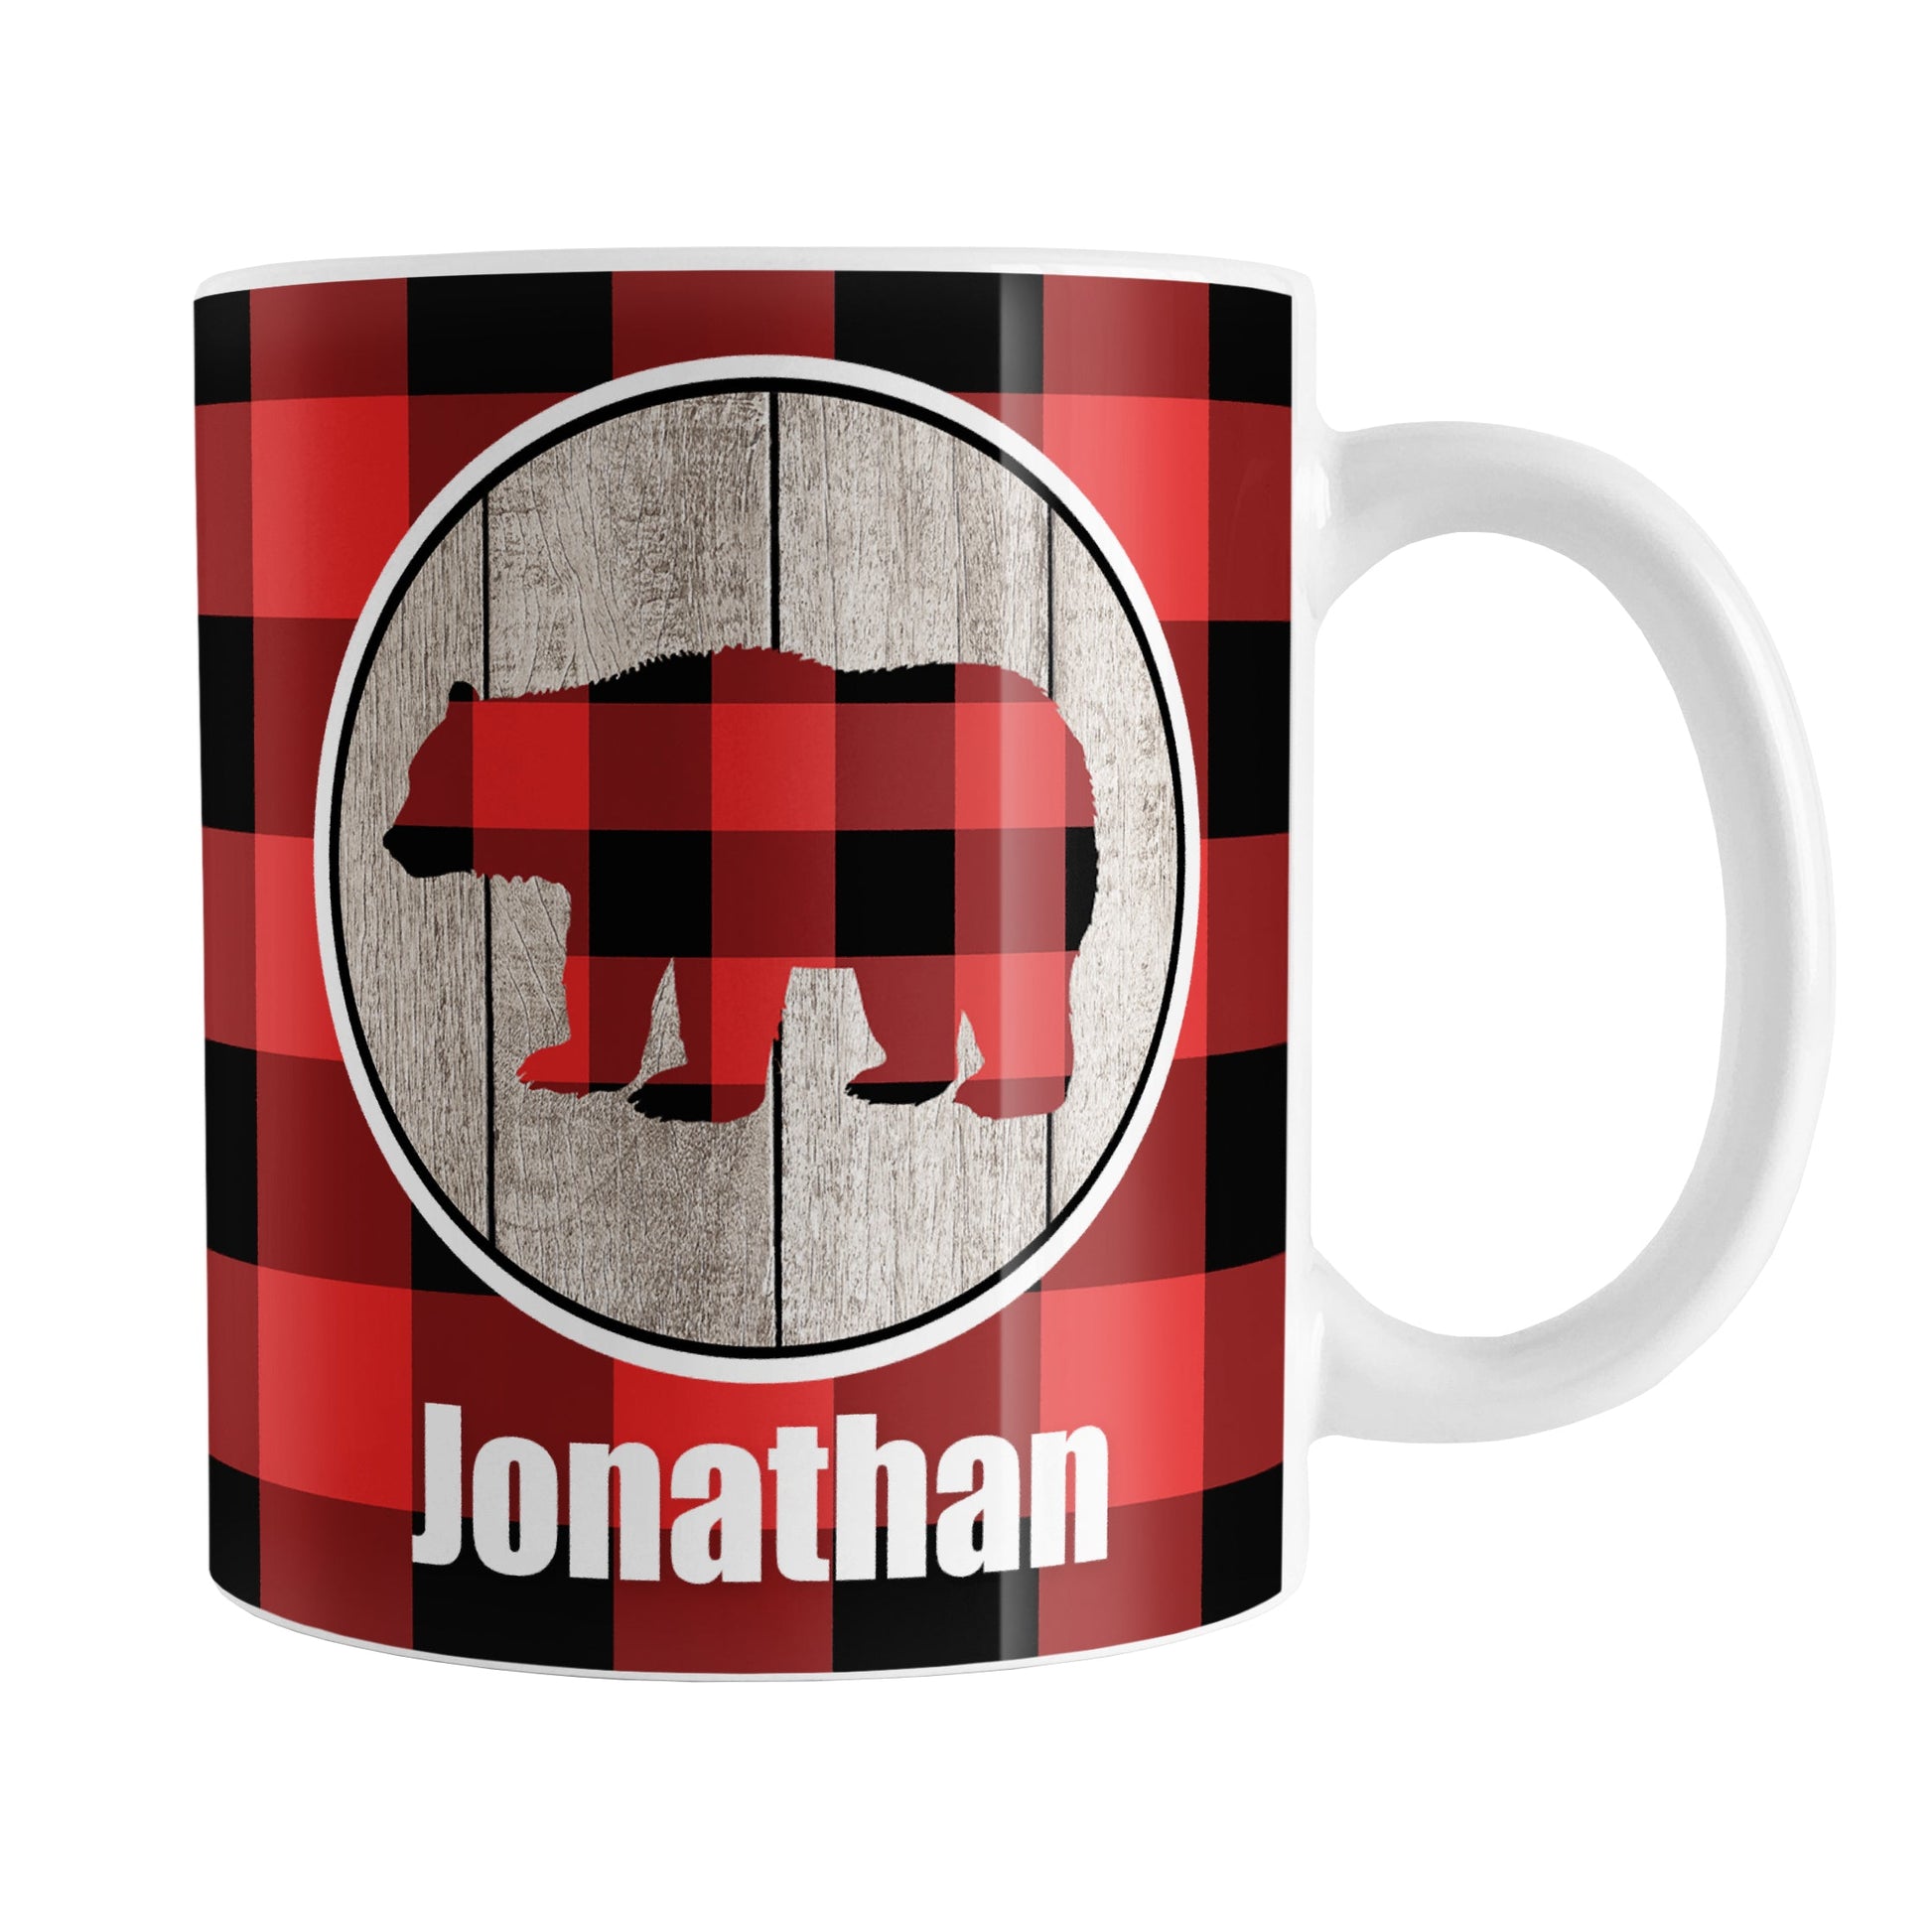 Personalized Rustic Red Buffalo Plaid Bear Mug (11oz) at Amy's Coffee Mugs. A ceramic coffee mug designed with a red and black buffalo plaid bear inside a rustic wood circle on both sides of the mug over a red and black buffalo plaid pattern that wraps around the mug to the handle. Your name is custom printed in white below the bear.